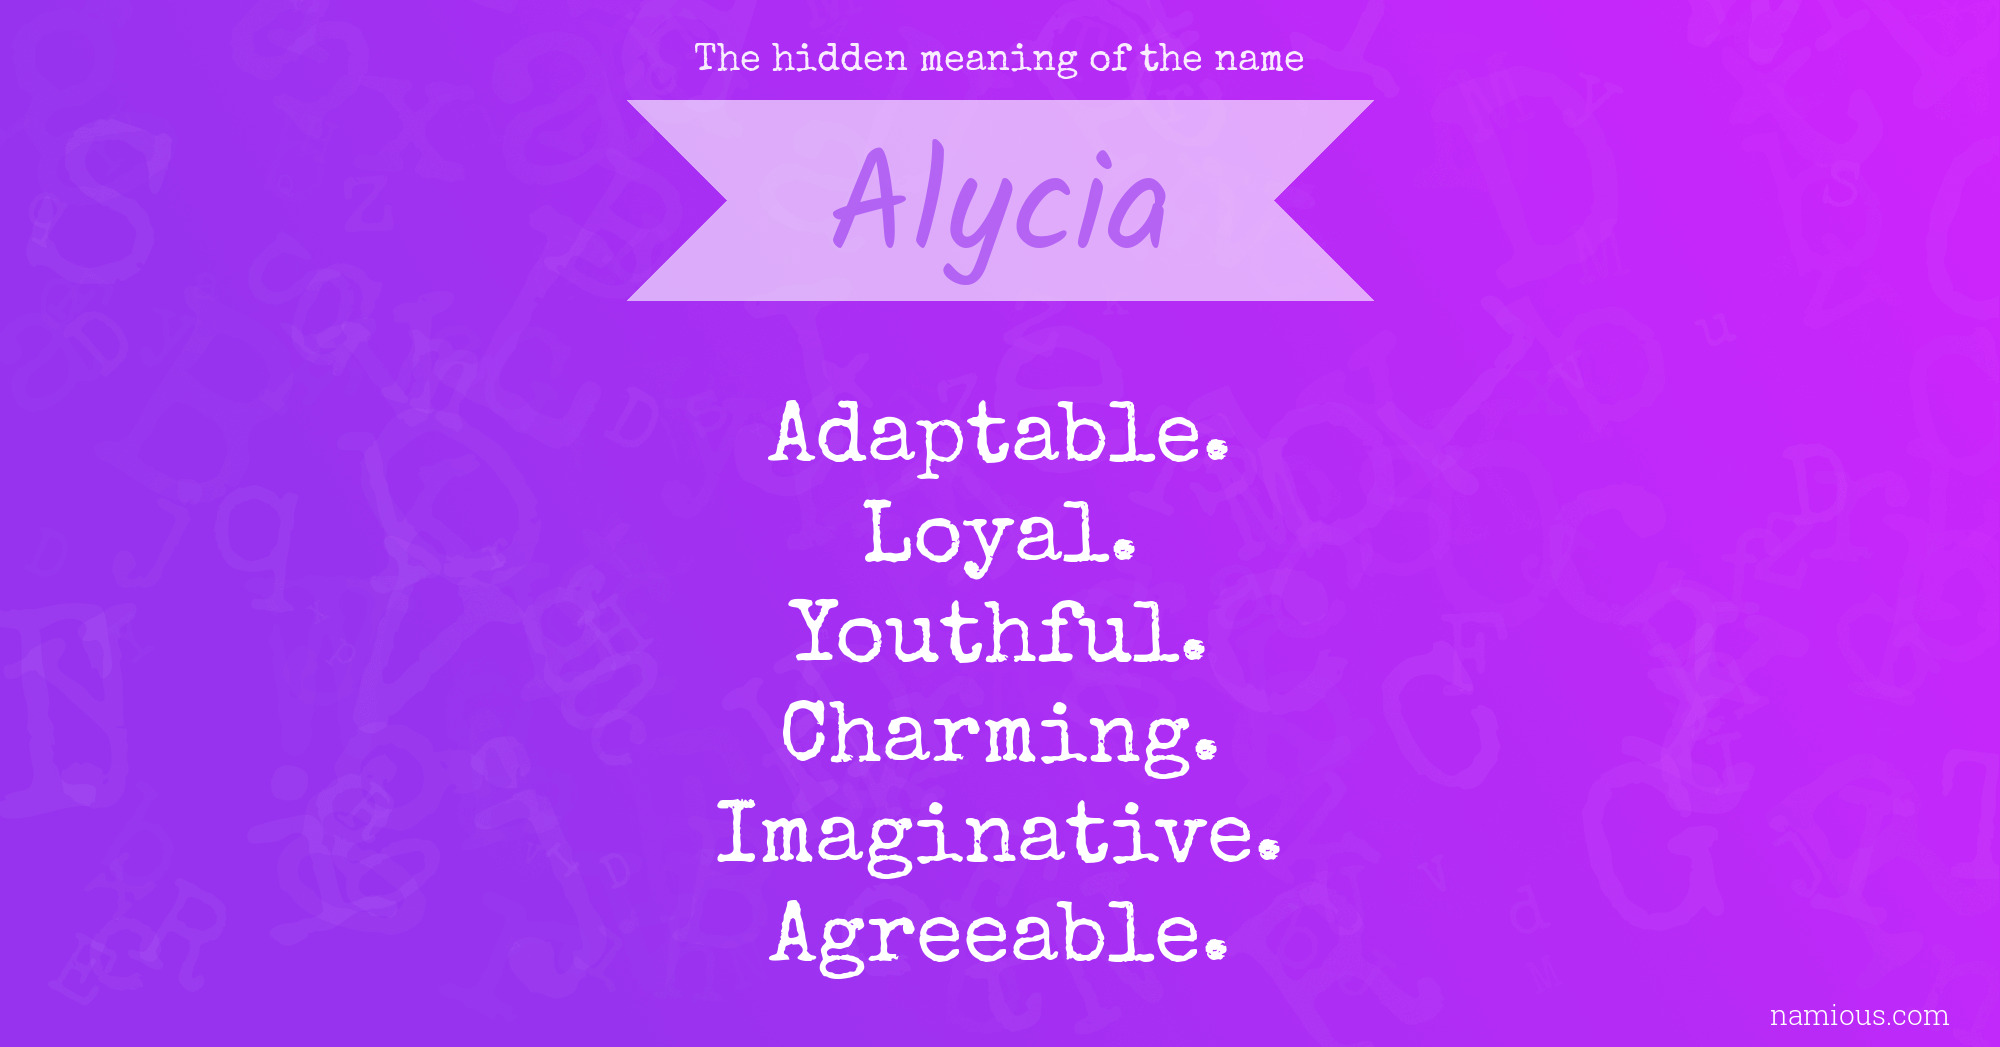 The hidden meaning of the name Alycia